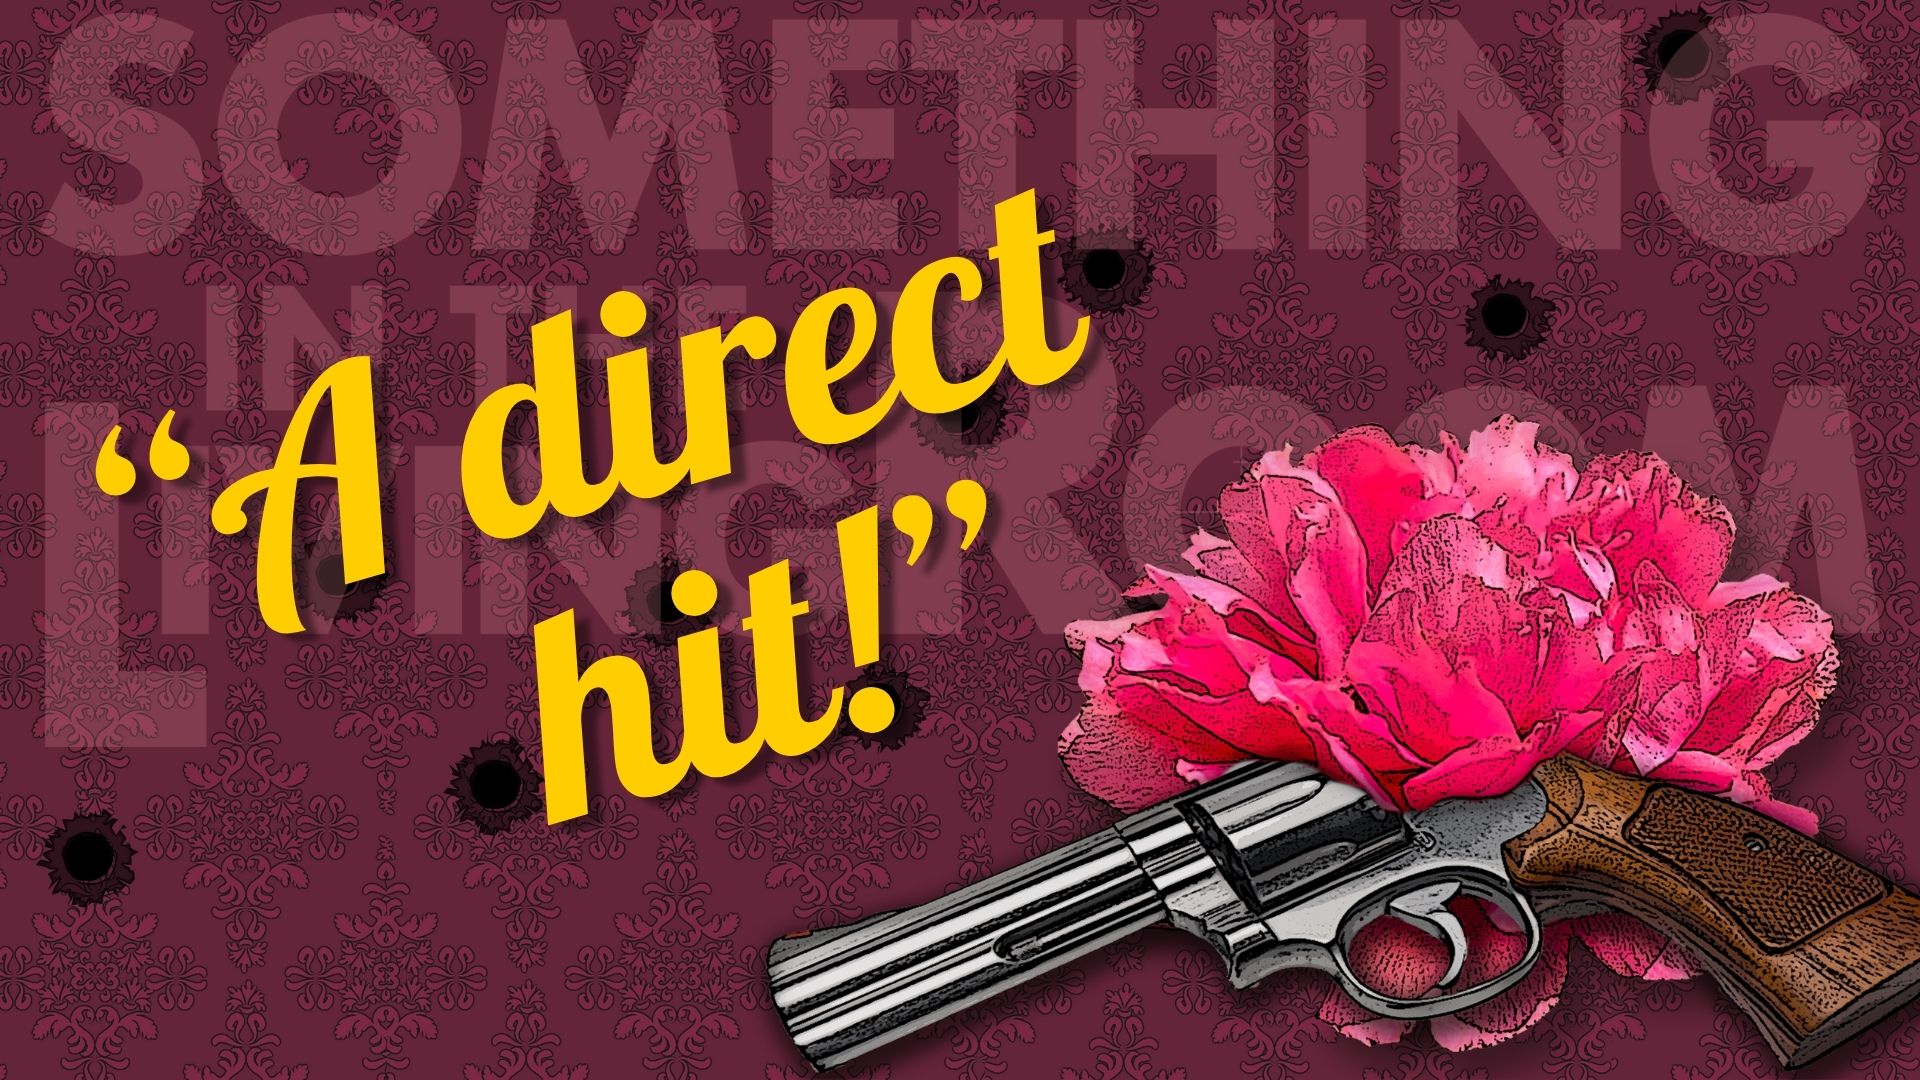 A graphic of a revolver and a pink rose in the foreground over a dark purple Victorian print background riddled with bullet holes. Yellow text reads "A direct hit!"